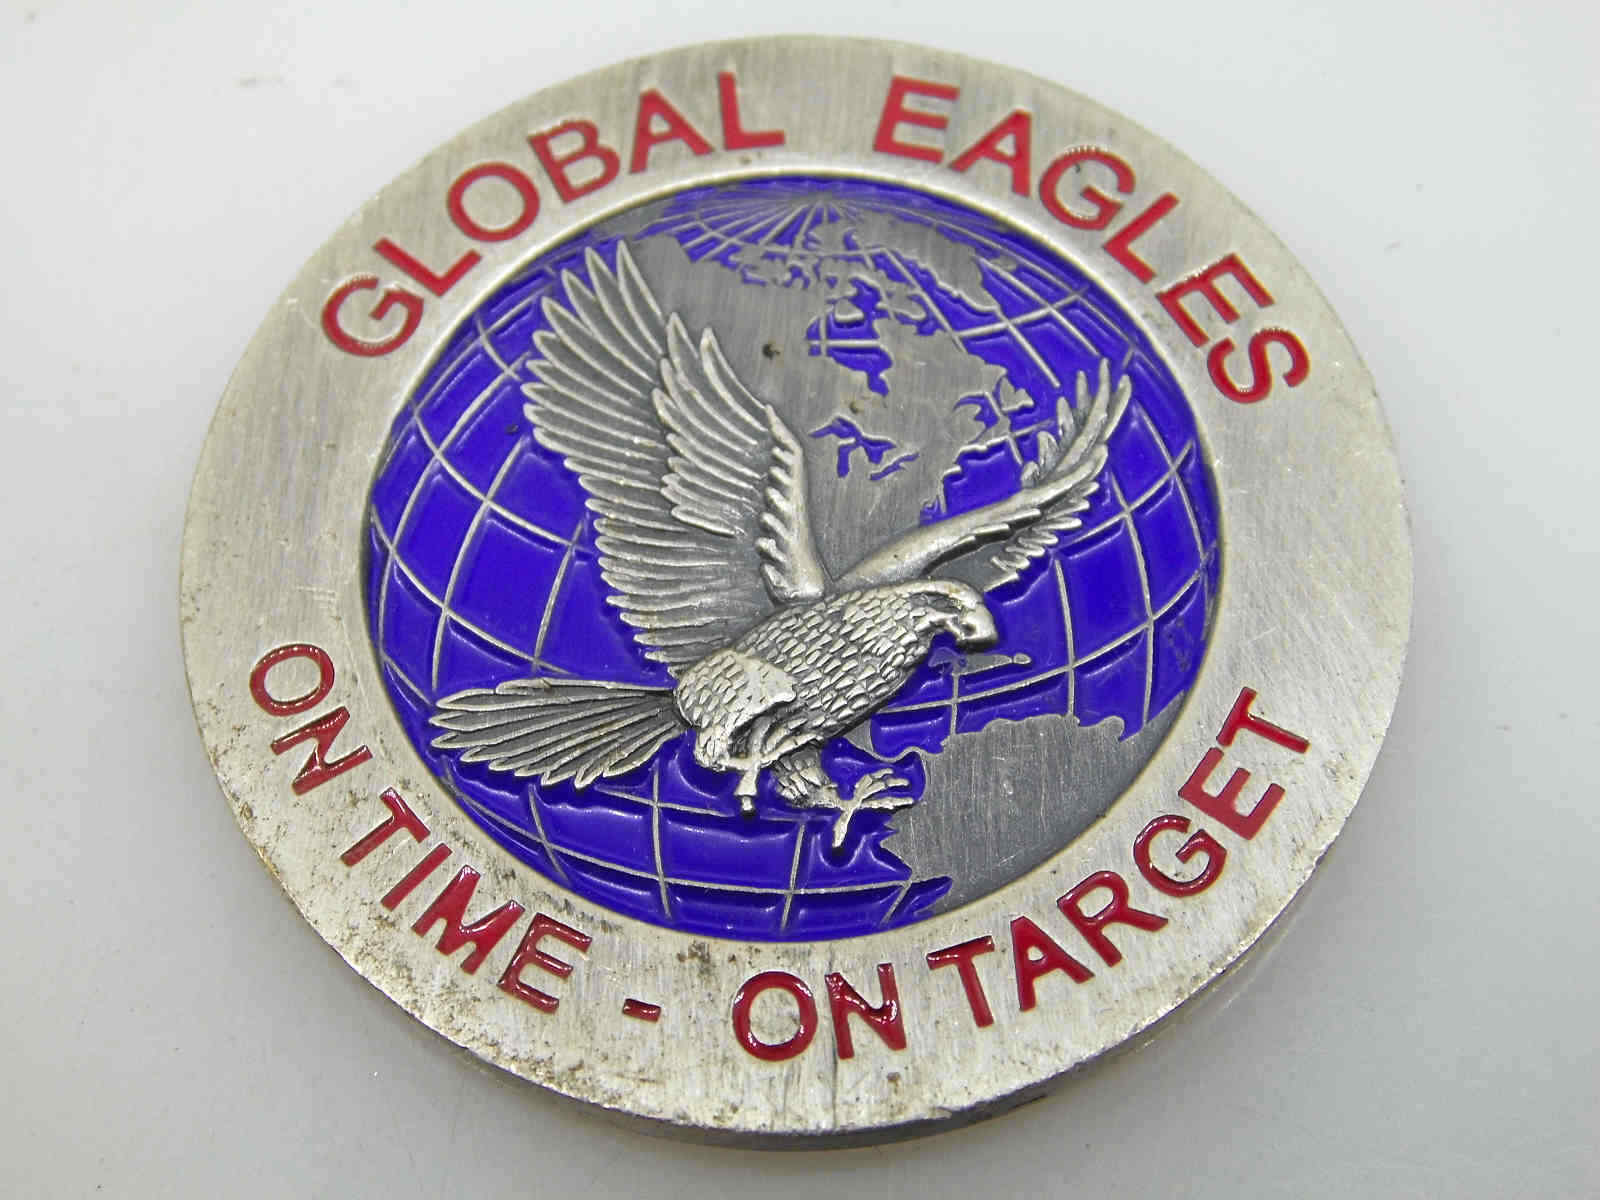 15TH AIRLIFT SQUADRON GLOBAL EAGLES CHALLENGE COIN